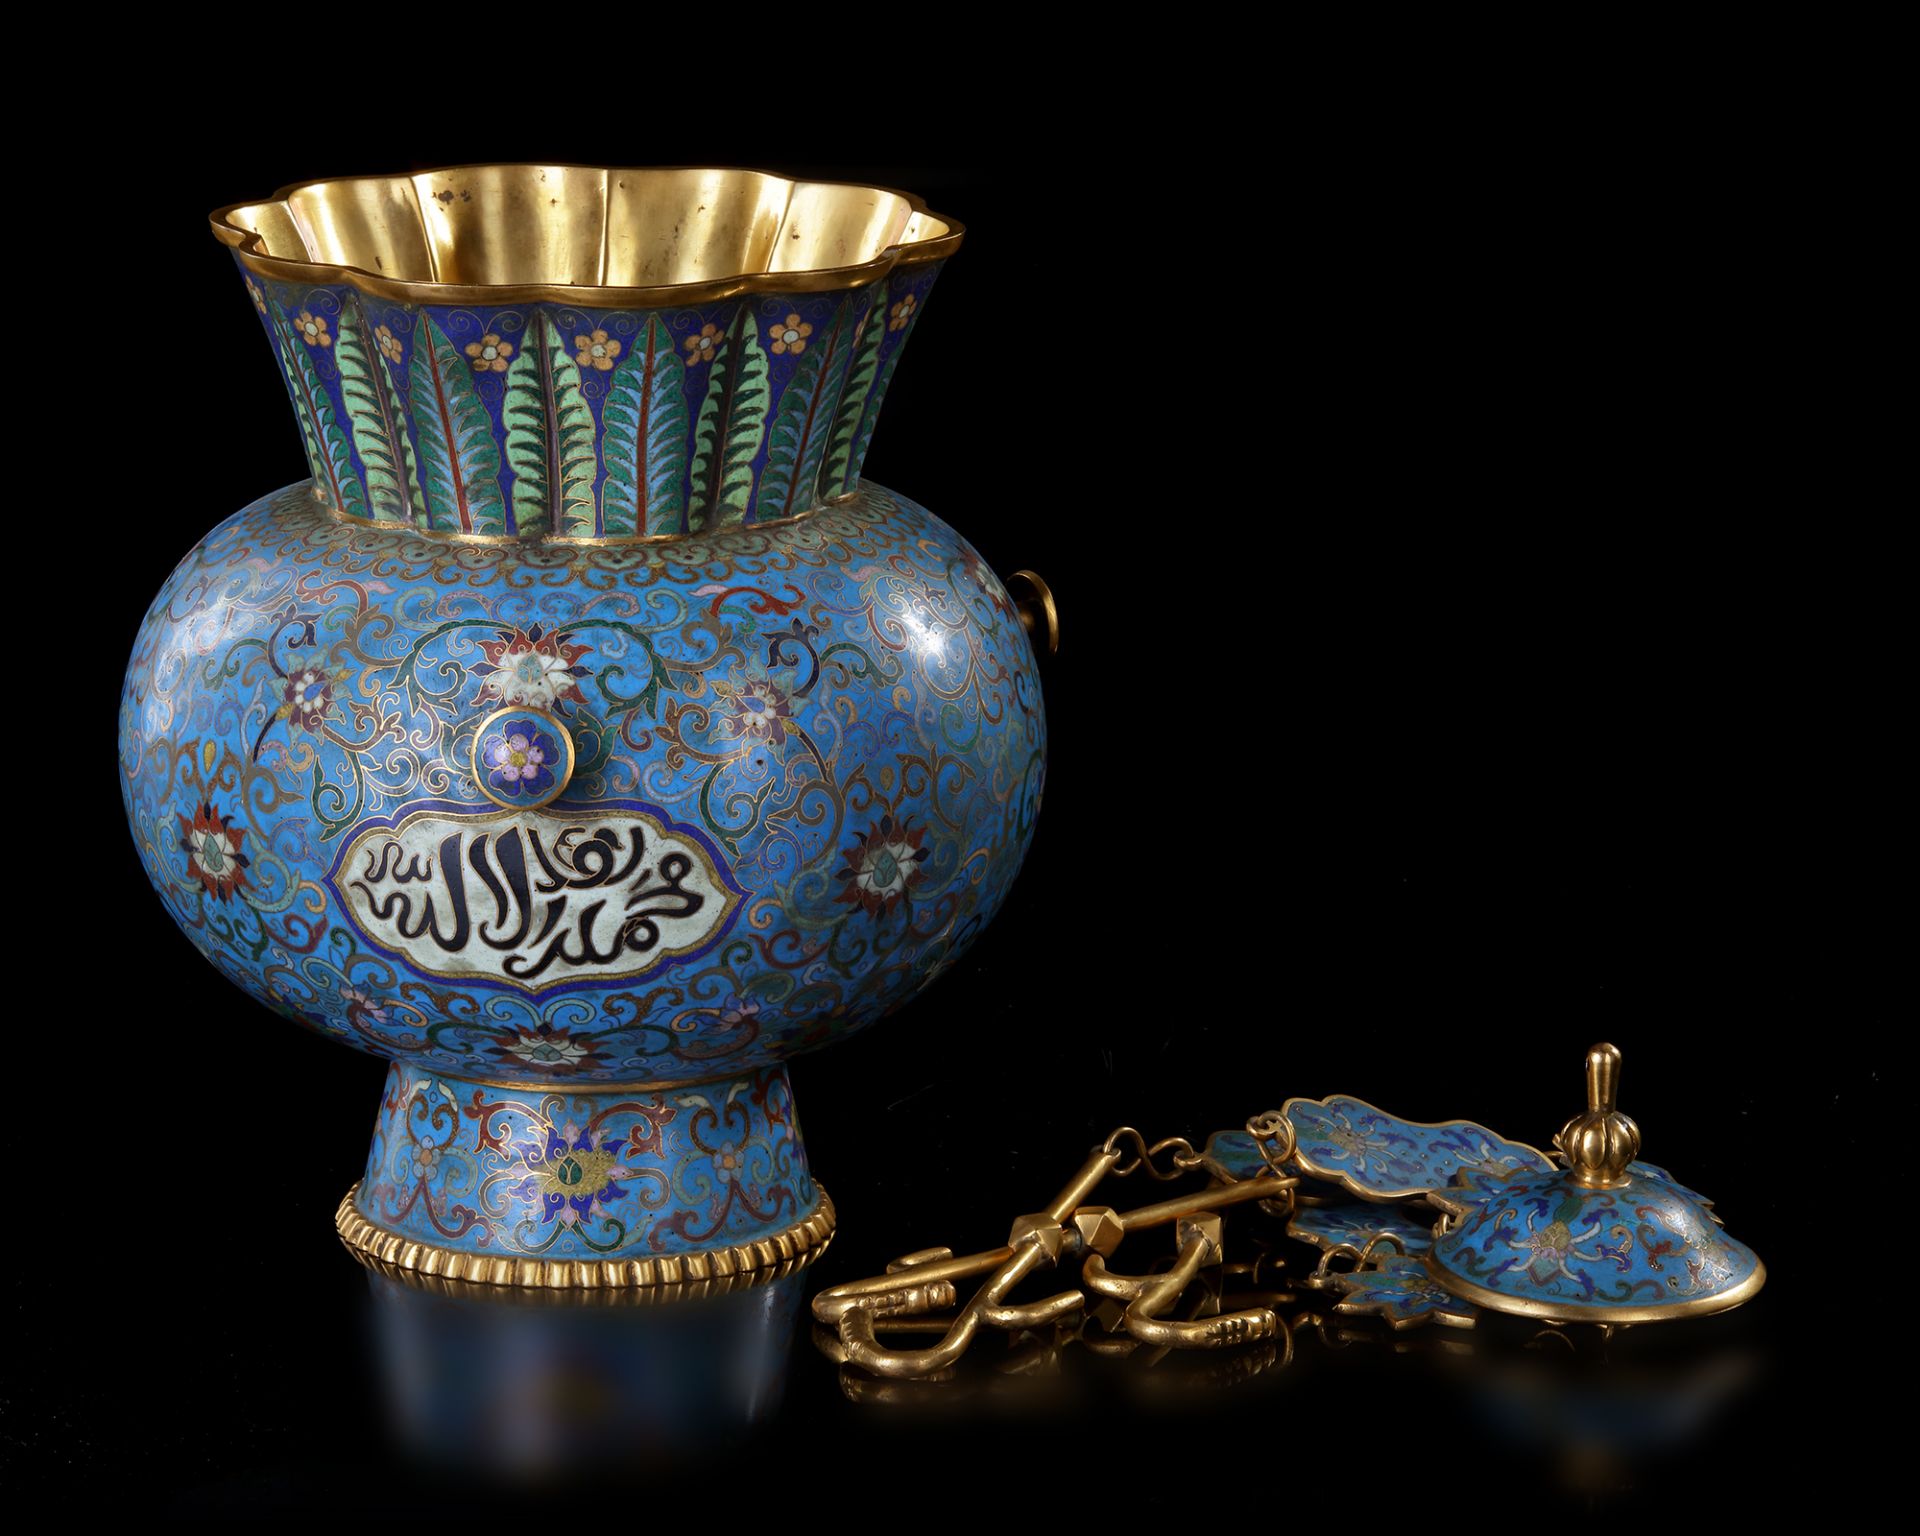 A CHINESE CLOISONNÉ MOSQUE LAMP FOR THE ISLAMIC MARKET, LATE 19TH CENTURY - Image 10 of 10